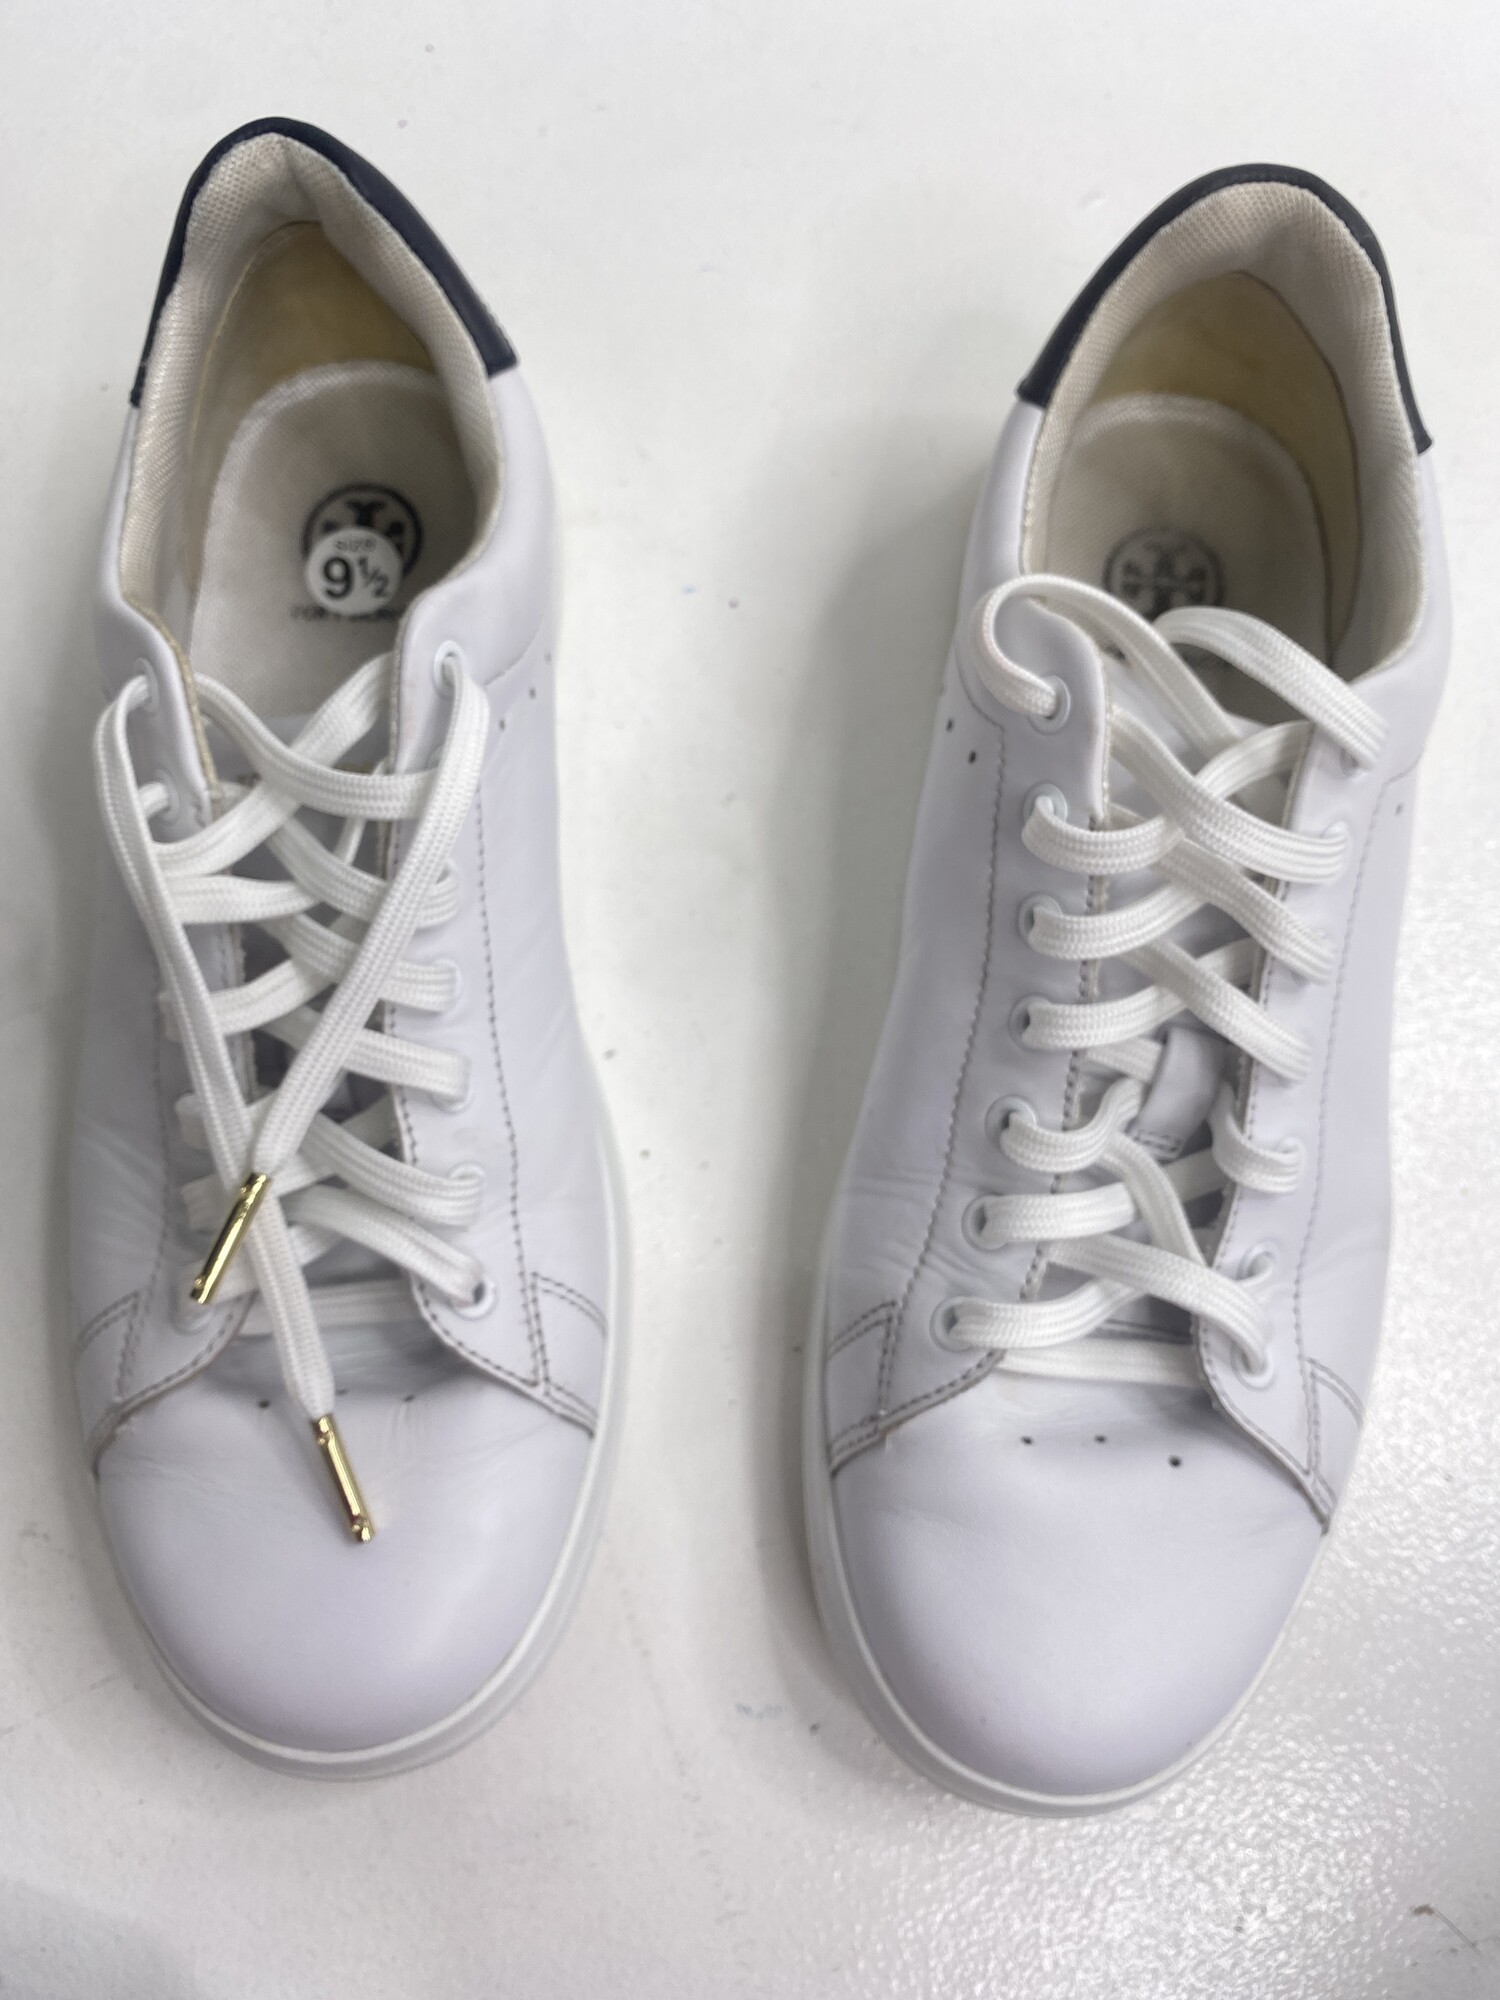 Tory Burch Sneakers, Size: 9.5, Color: White